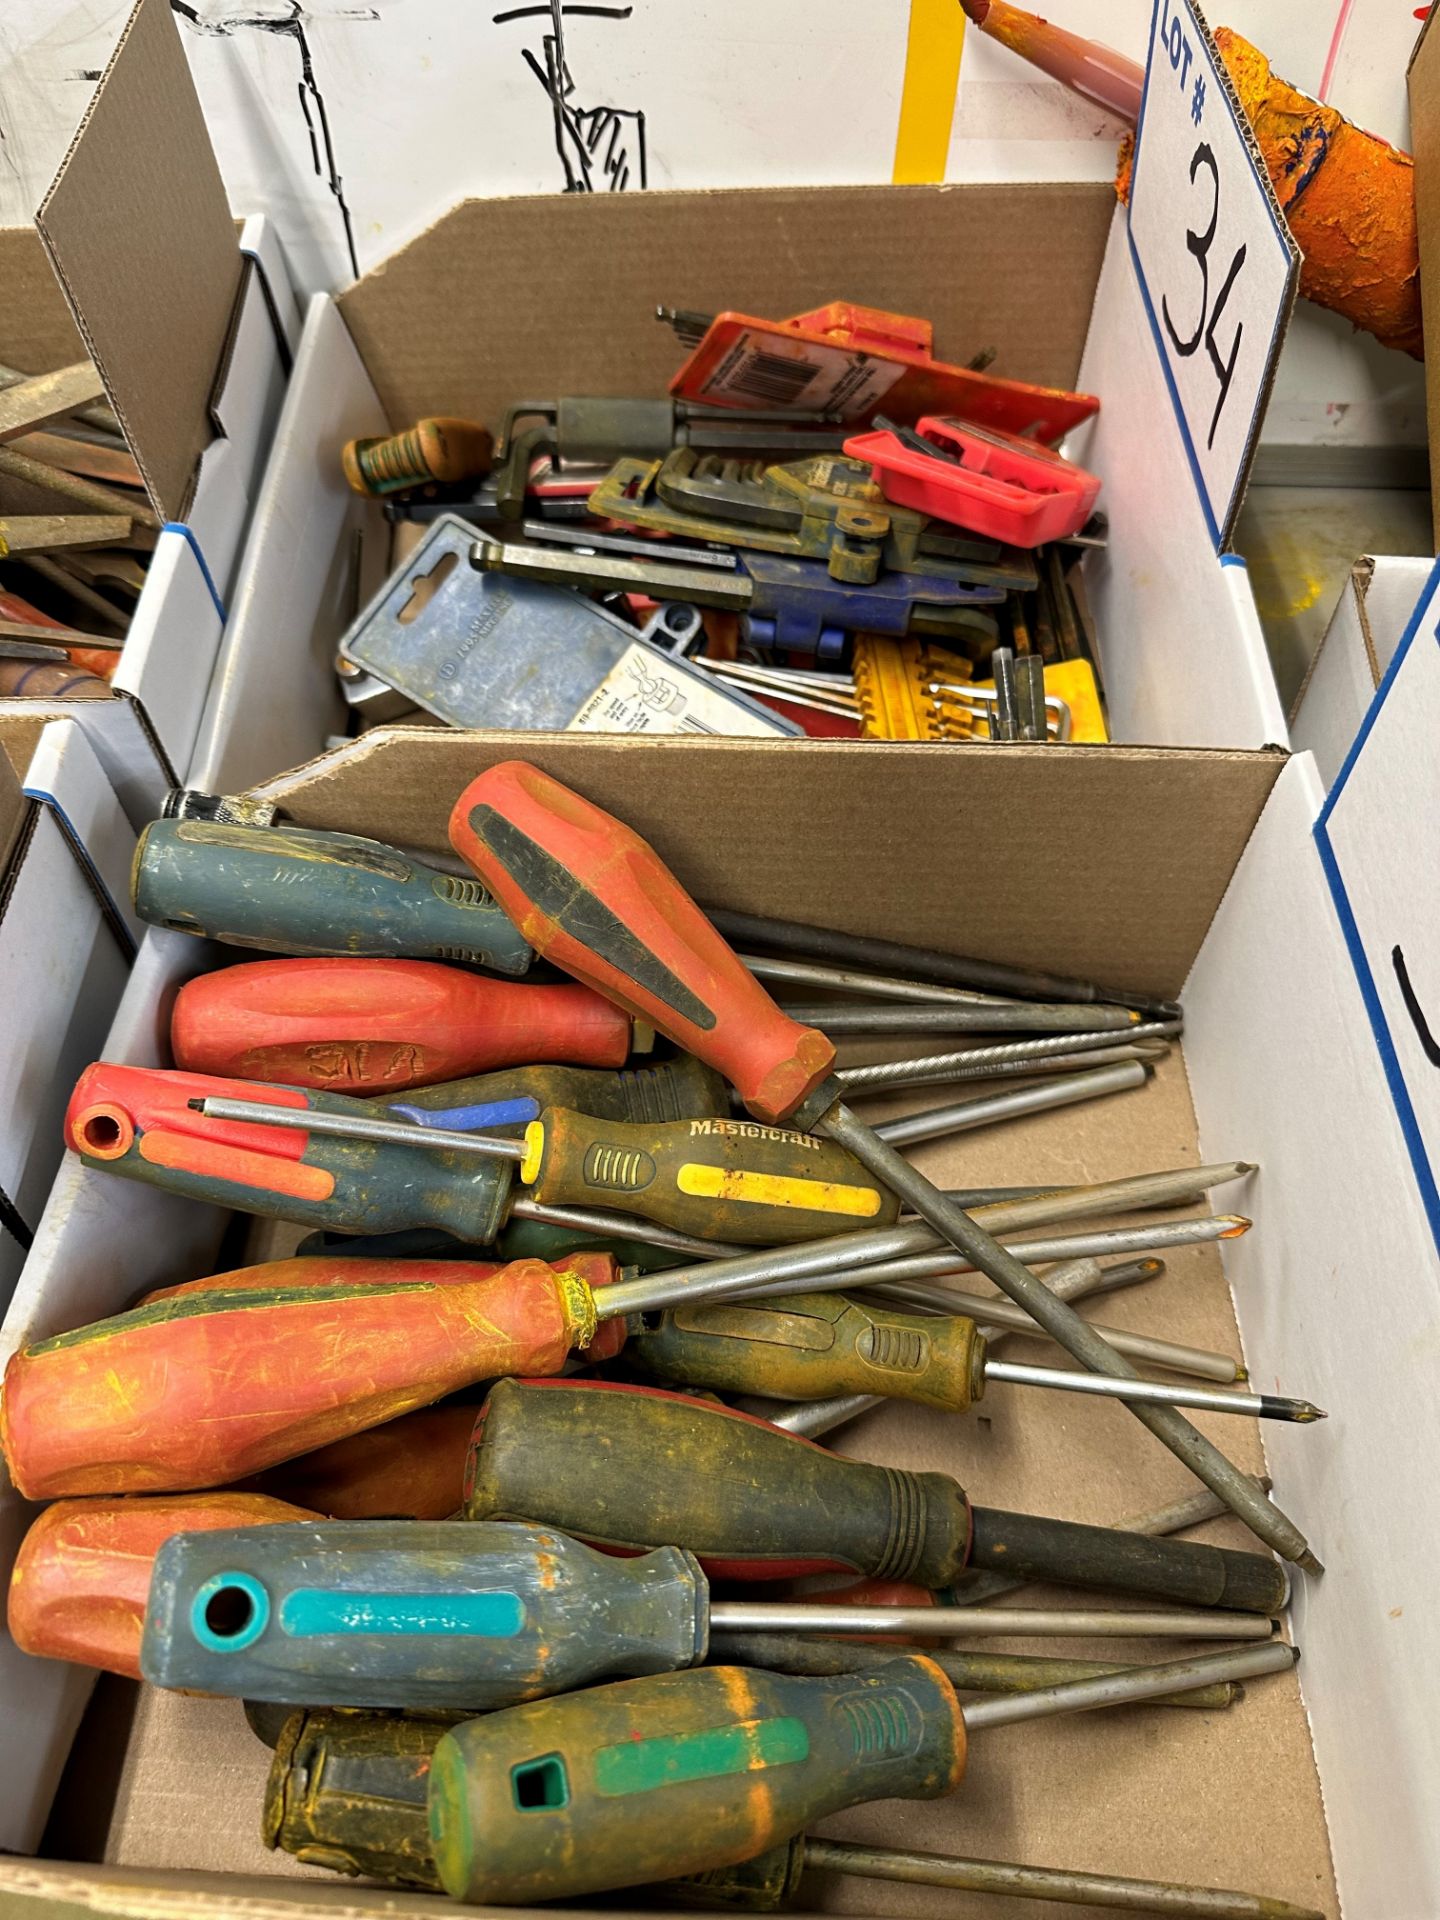 LOT OF (5) BOXES OF PIPE WRENCHES, CHANNEL LOCKS, AXE, DRIVERS, ALLEN KEYS, FILES - Image 3 of 3